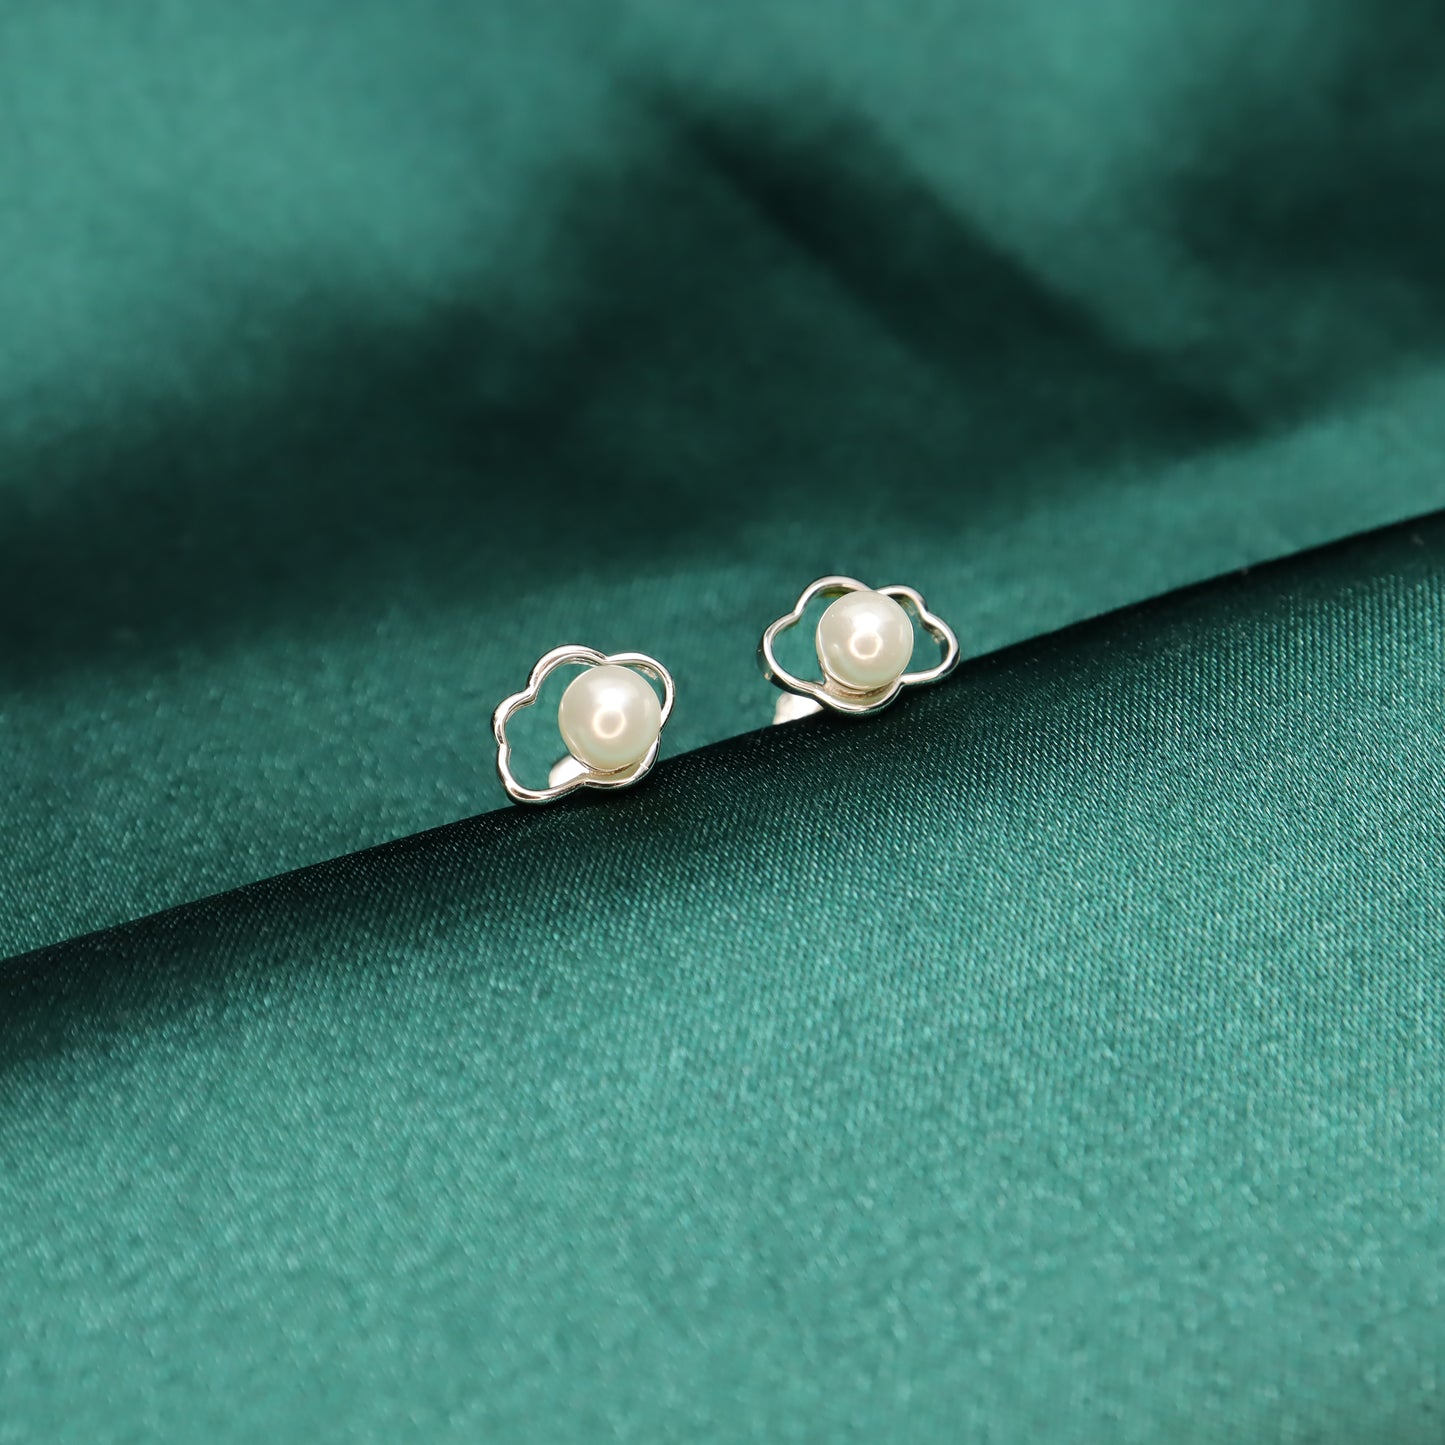 Hollow Cloud Pearl - S925 Sterling Silver with Pearl Stud Earrings (Color: Silver)